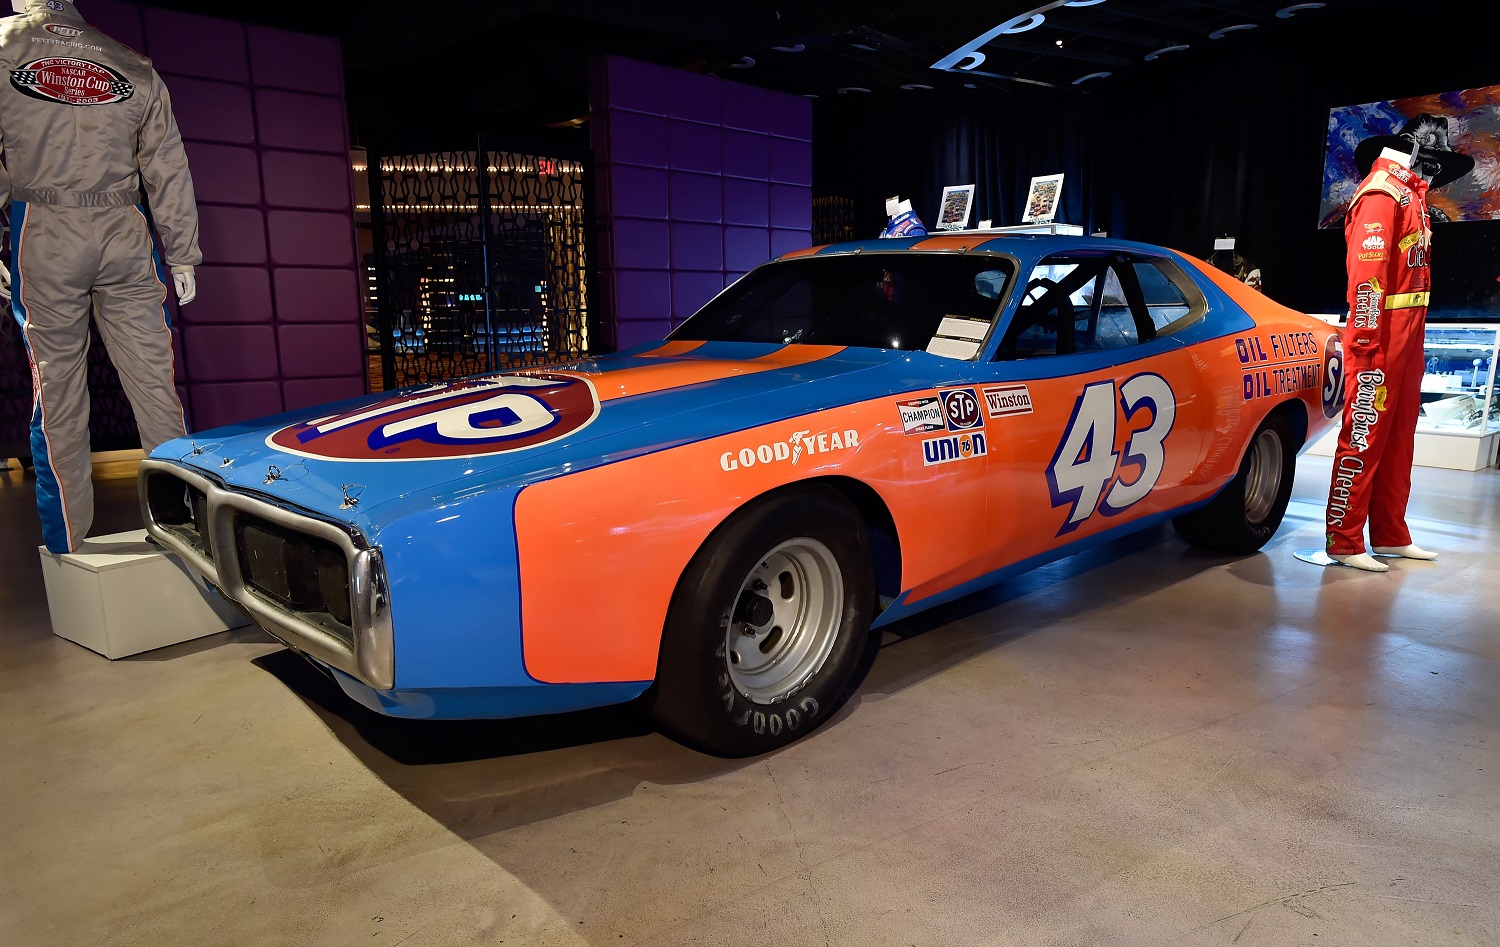 A 1974 Dodge Charger that Richard Petty drove to victory at the 1974 Daytona 500 is displayed at Julien's Auctions' preview of a collection of items from NASCAR Hall of Famer Richard Petty at Planet Hollywood Resort & Casino on May 8, 2018, in Las Vegas, Nevada.